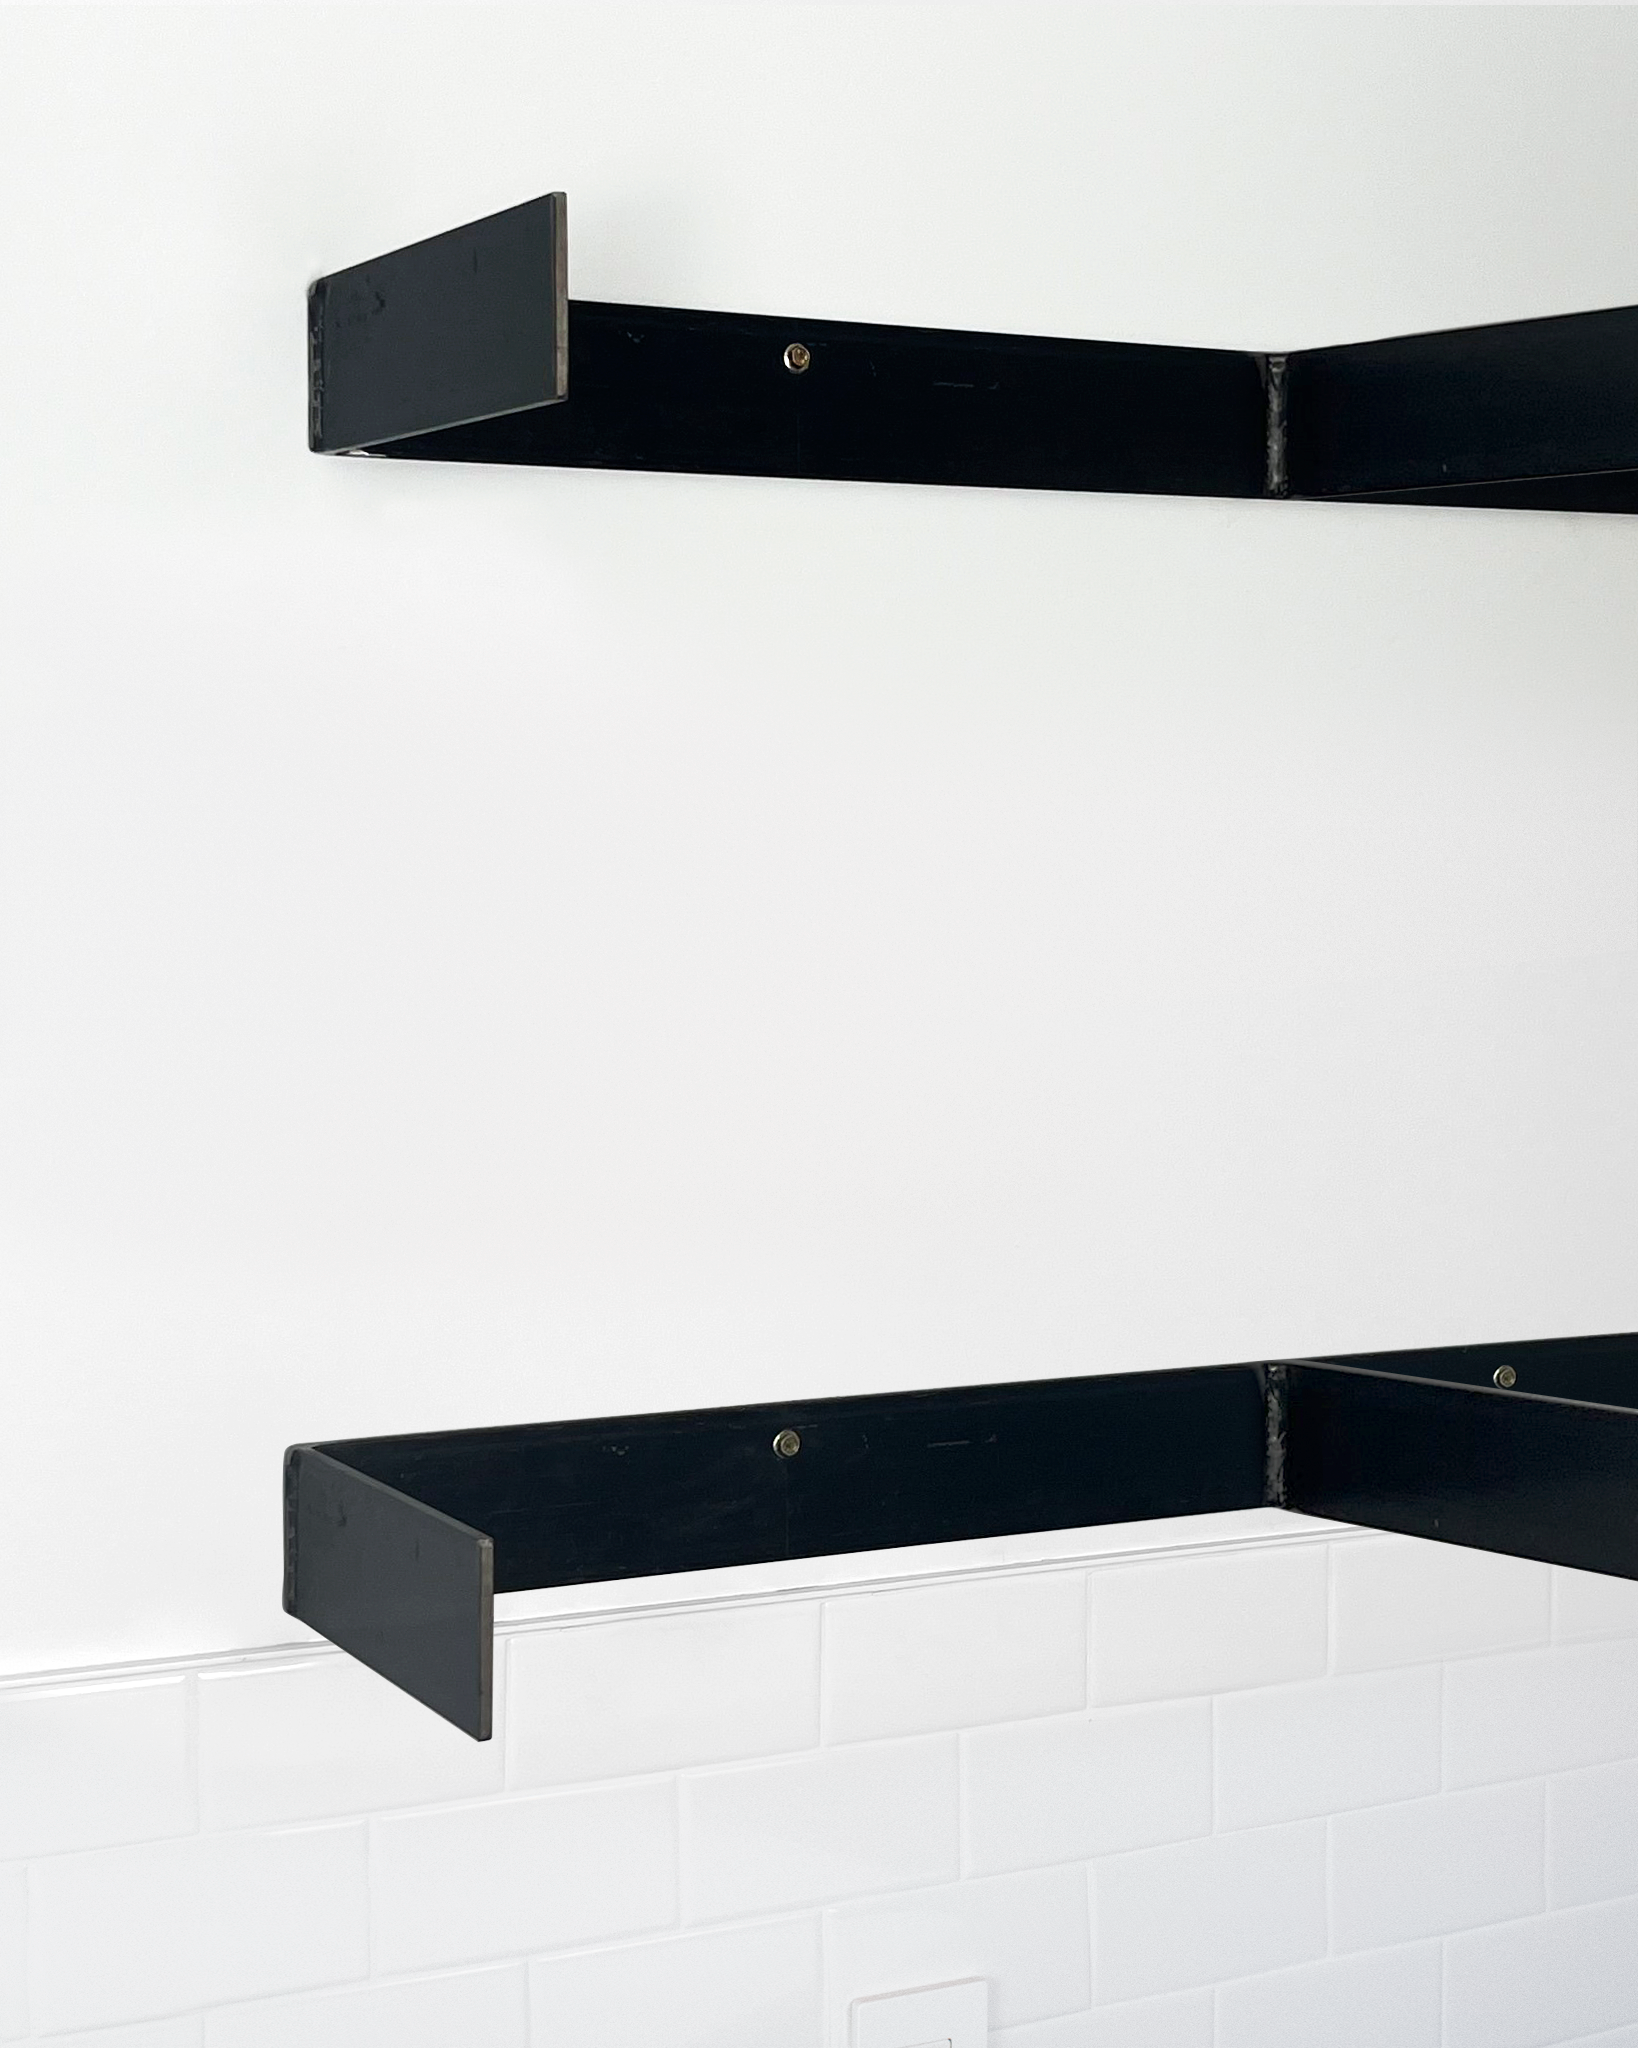 Cherry Floating Shelves 2-4" thick